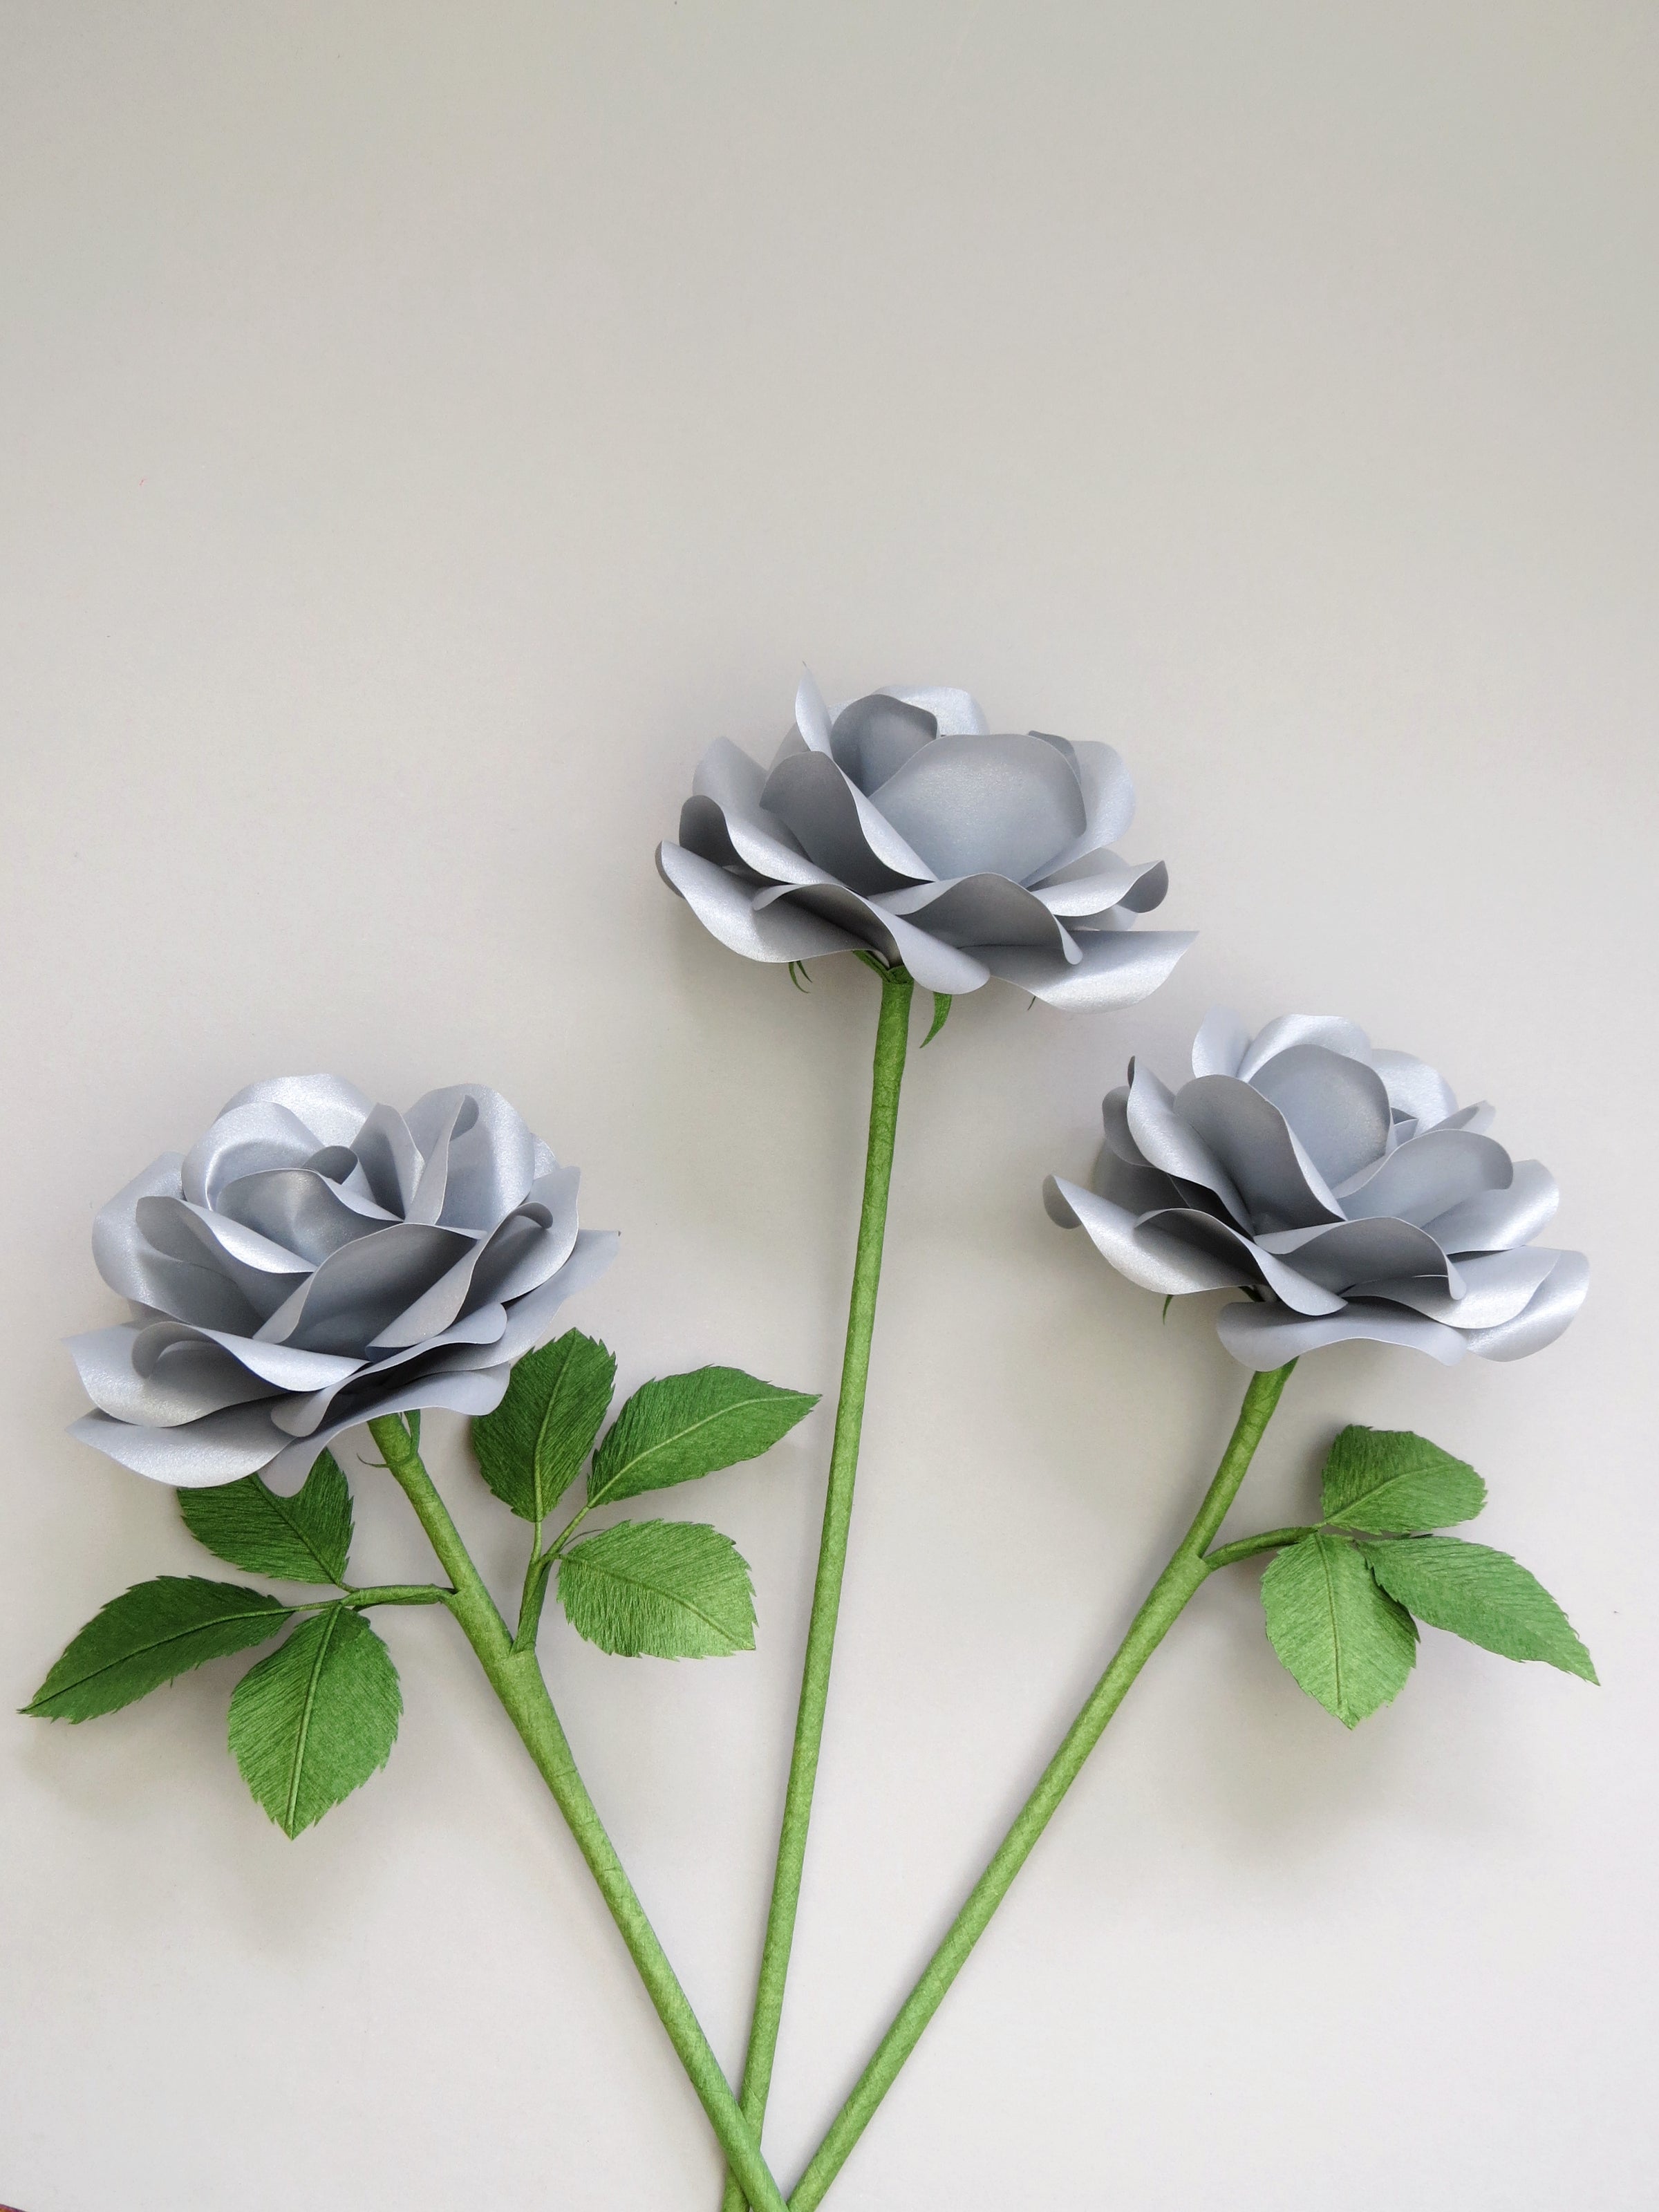 Three metallic steel paper roses randomly lying next to each other on a light grey background. The left rose has six ivy green leaves attached, the middle rose is leafless, the middle and the right rose has three ivy green leaves.